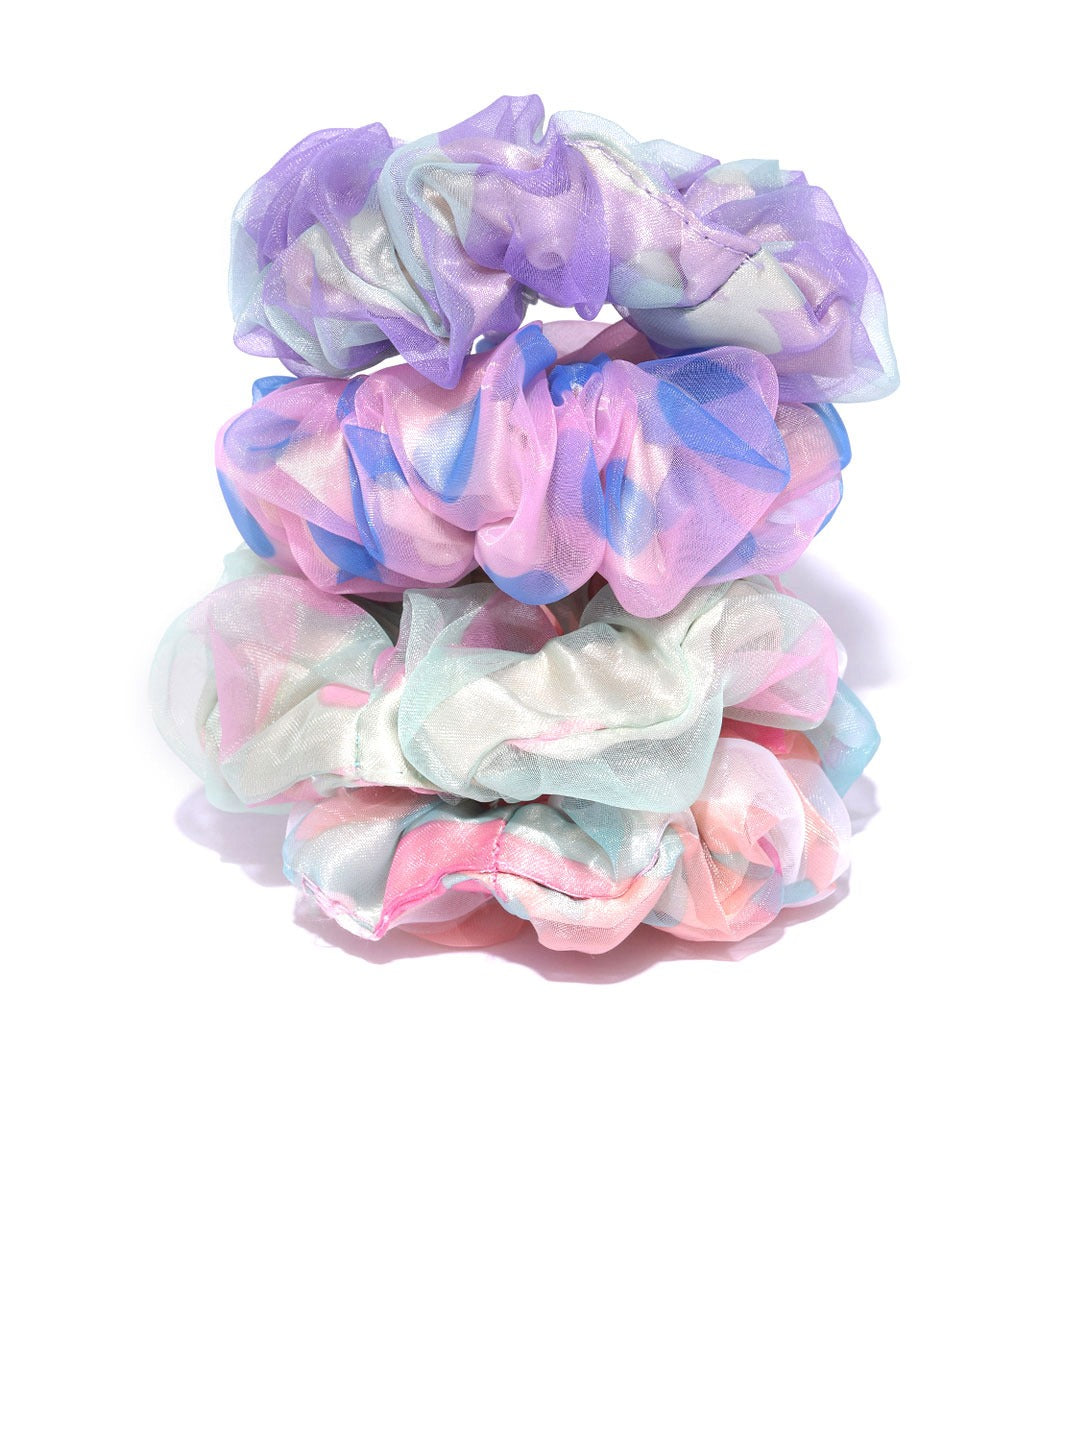 Blueberry KIDS set of 4 multi color scrunchies